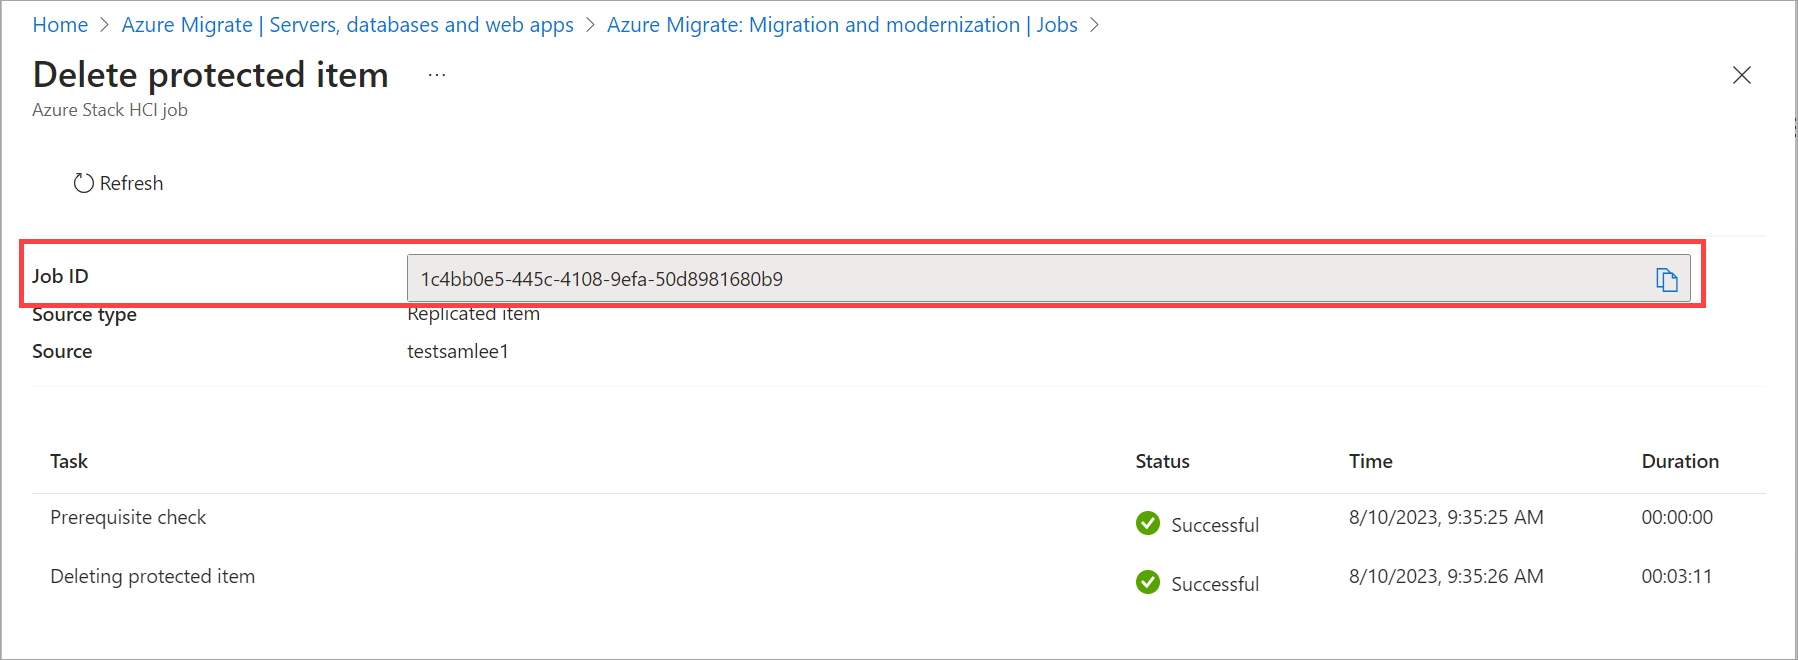 Screenshot Azure Migrate project > Migration tools > Overview > Azure Stack HCI migration > Jobs >  Your job > Create or update protected item in Azure portal.